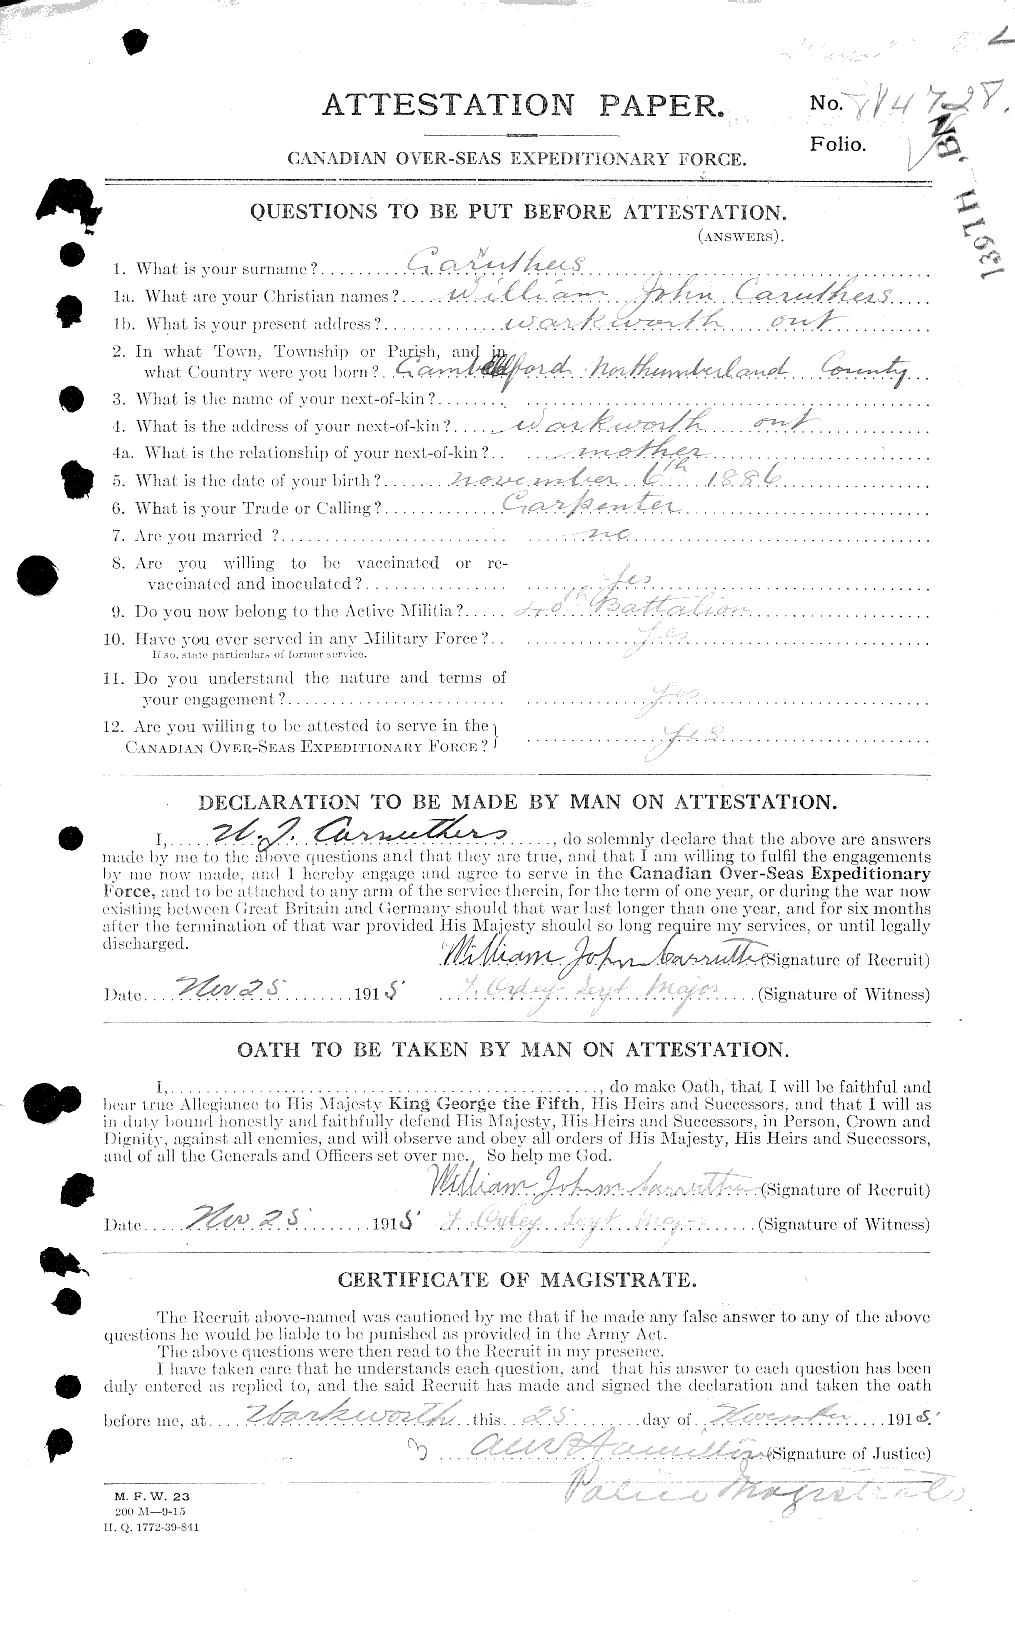 Personnel Records of the First World War - CEF 011462a